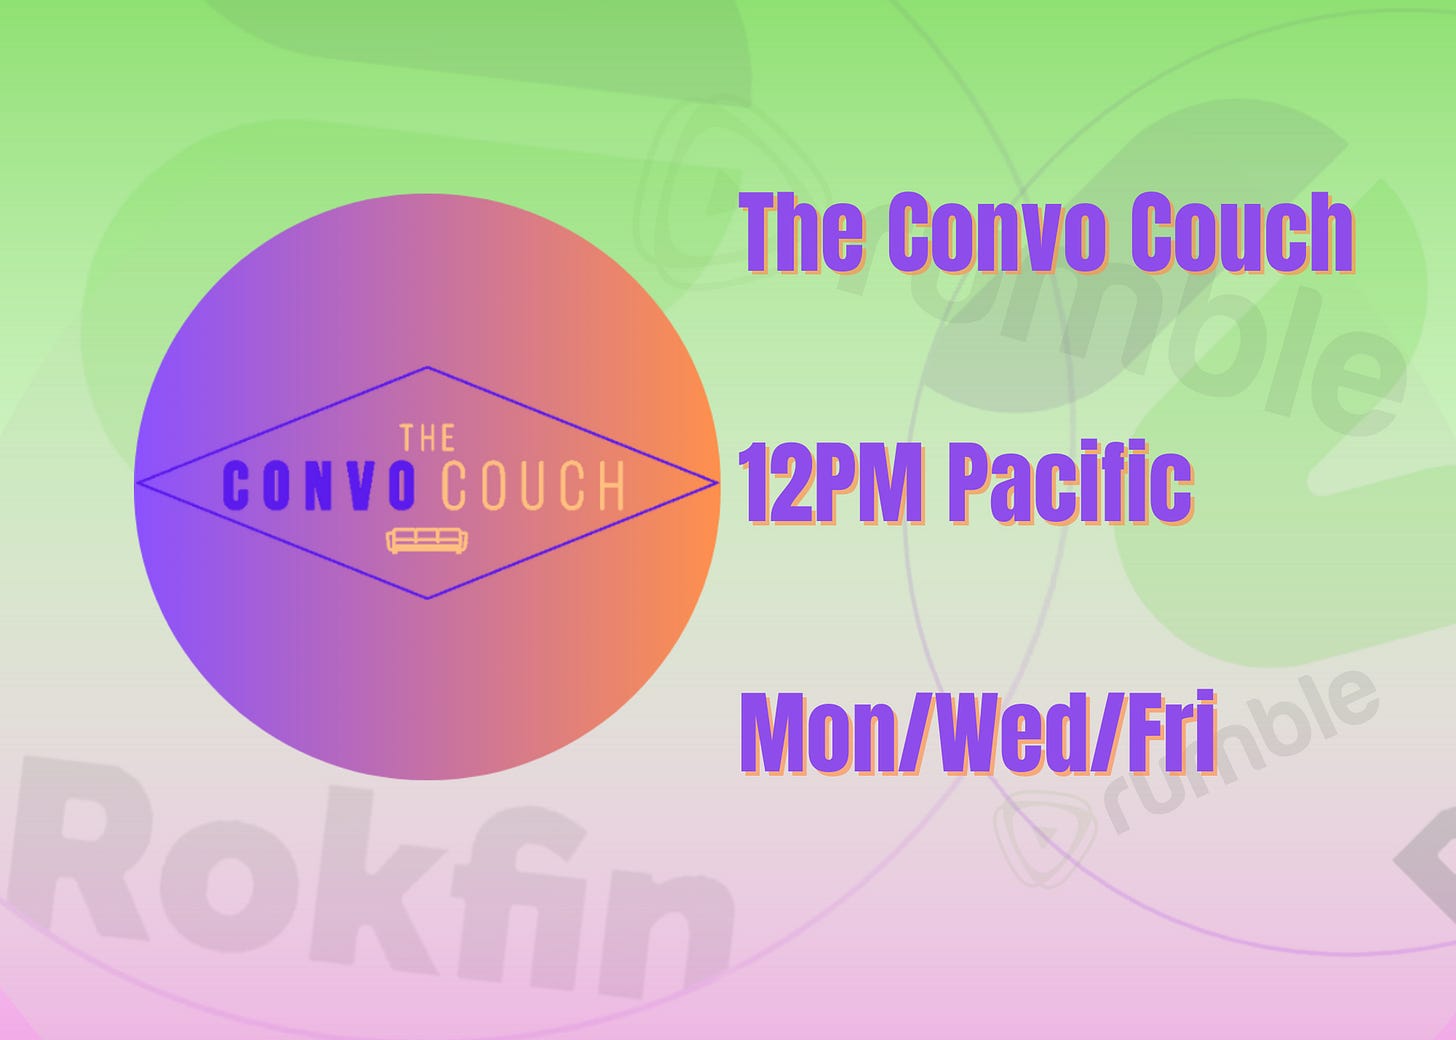 The Convo Couch Show Schedule